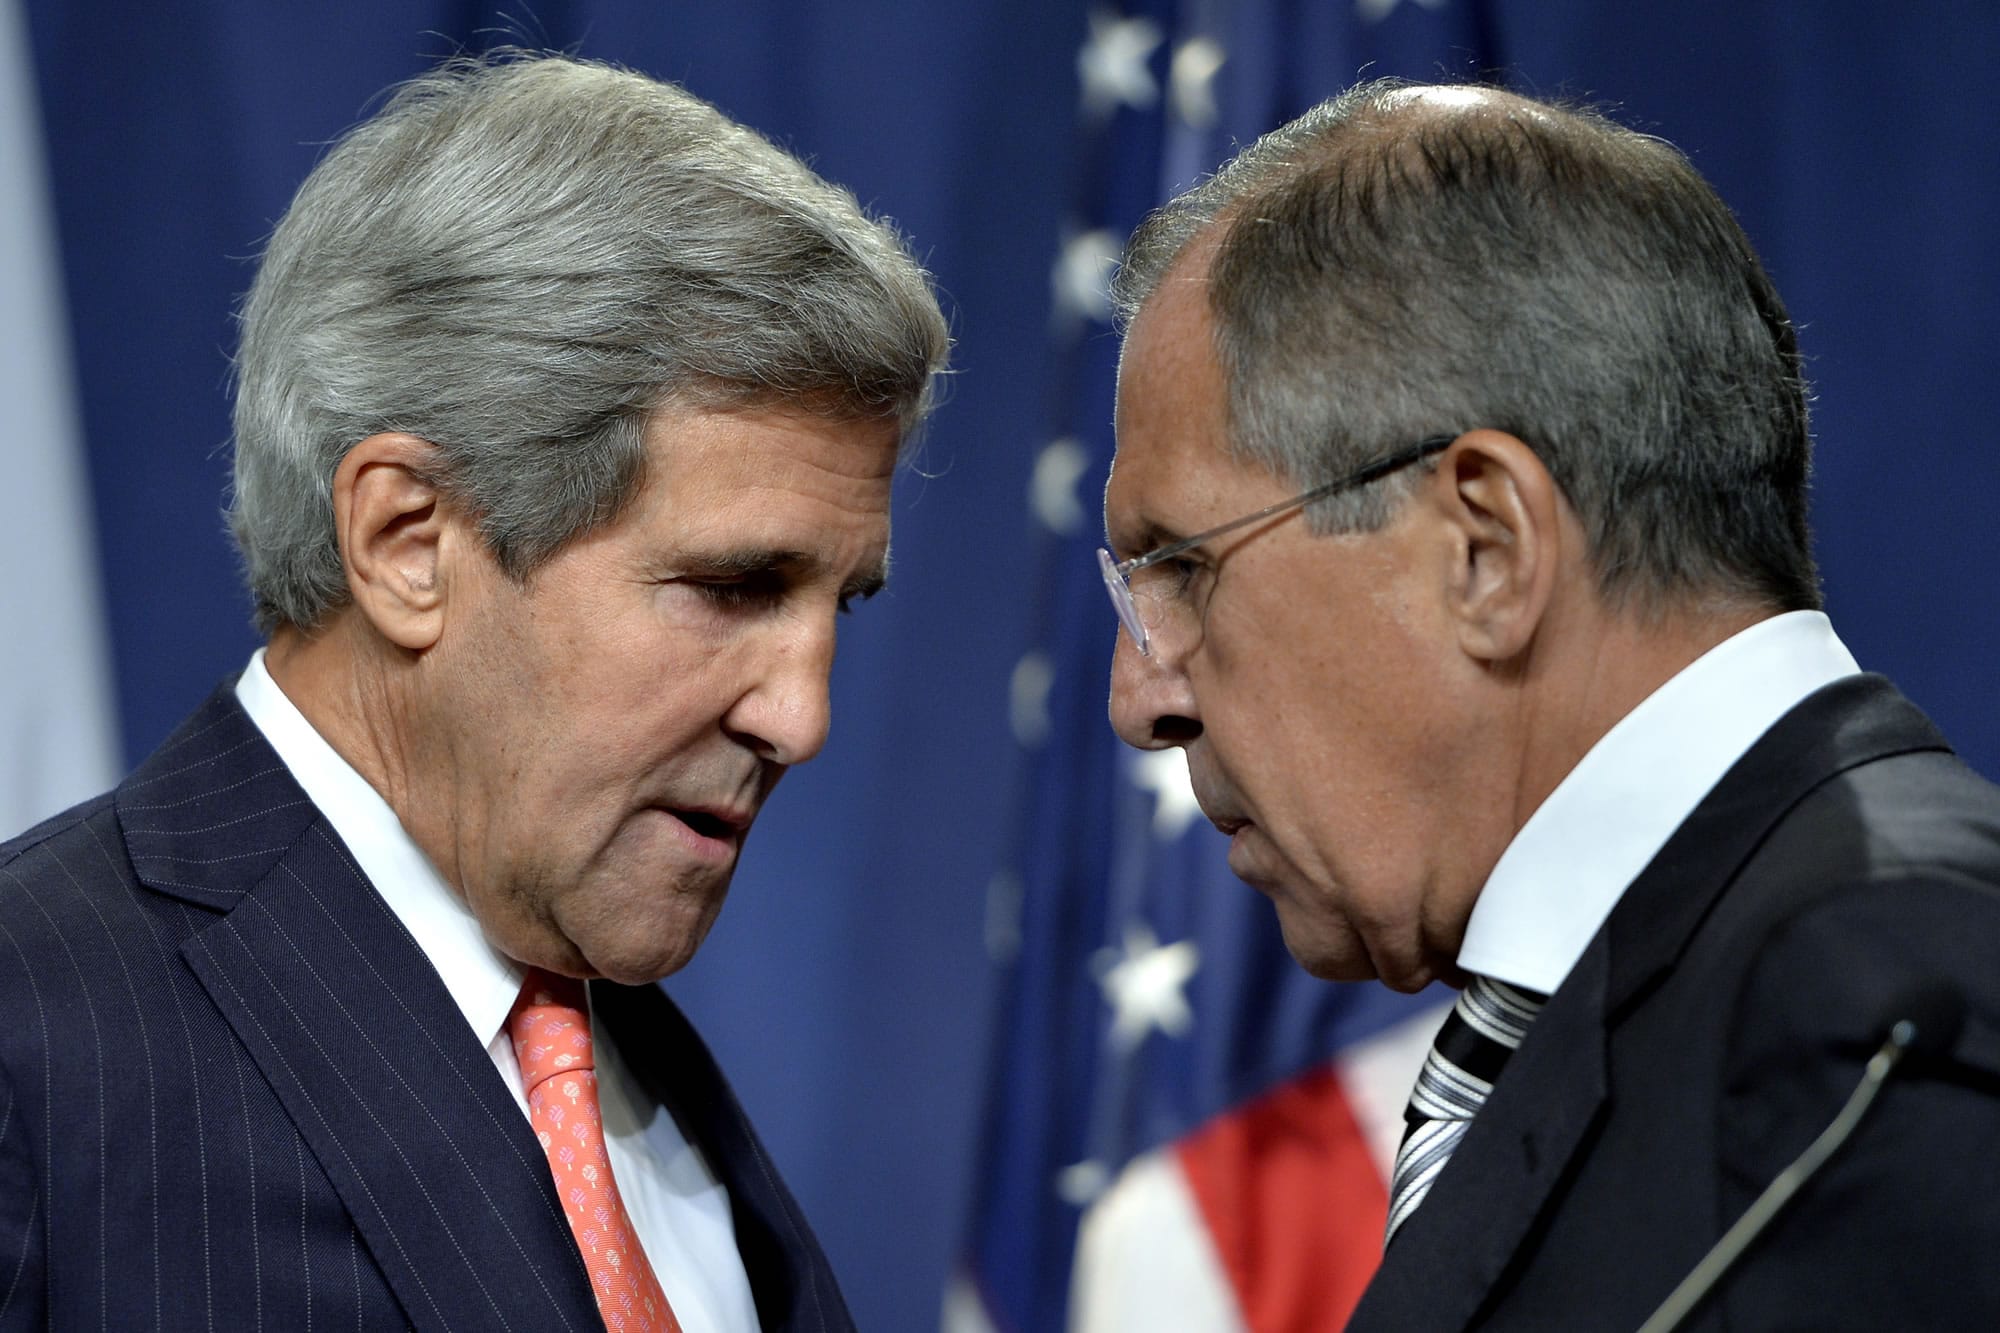 U.S. Secretary of State John Kerry, left, speaks with Russian Foreign Minister Sergei Lavrov, right, during  a news conference Saturday in Geneva, Switzerland. Kerry and Lavrov said Saturday they have reached an agreement on a framework for Syria to destroy all of its chemical weapons, and would seek a U.N.